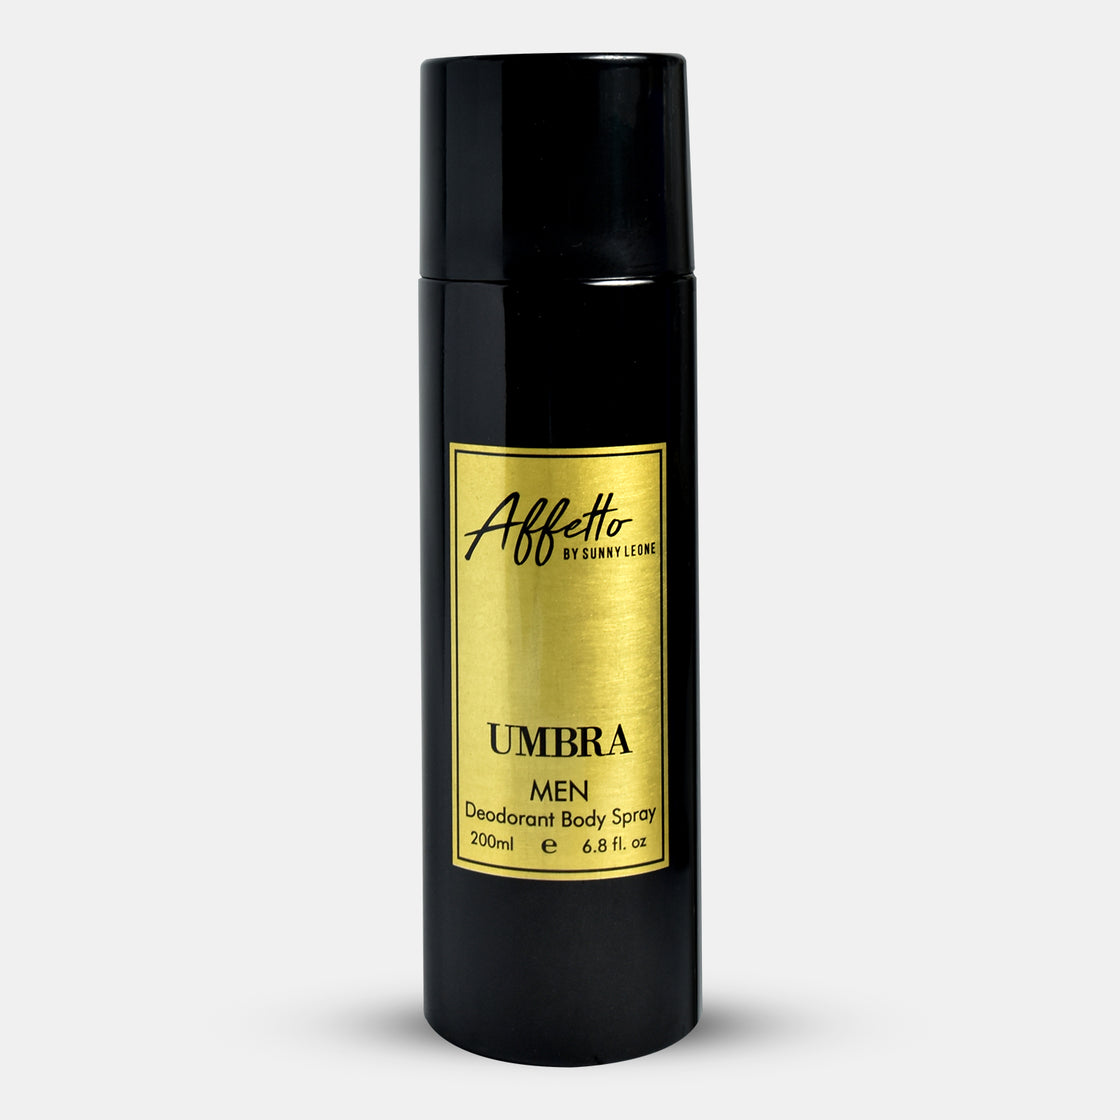 UMBRA- FOR HIM AFFETTO BY SUNNY LEONE -200ML